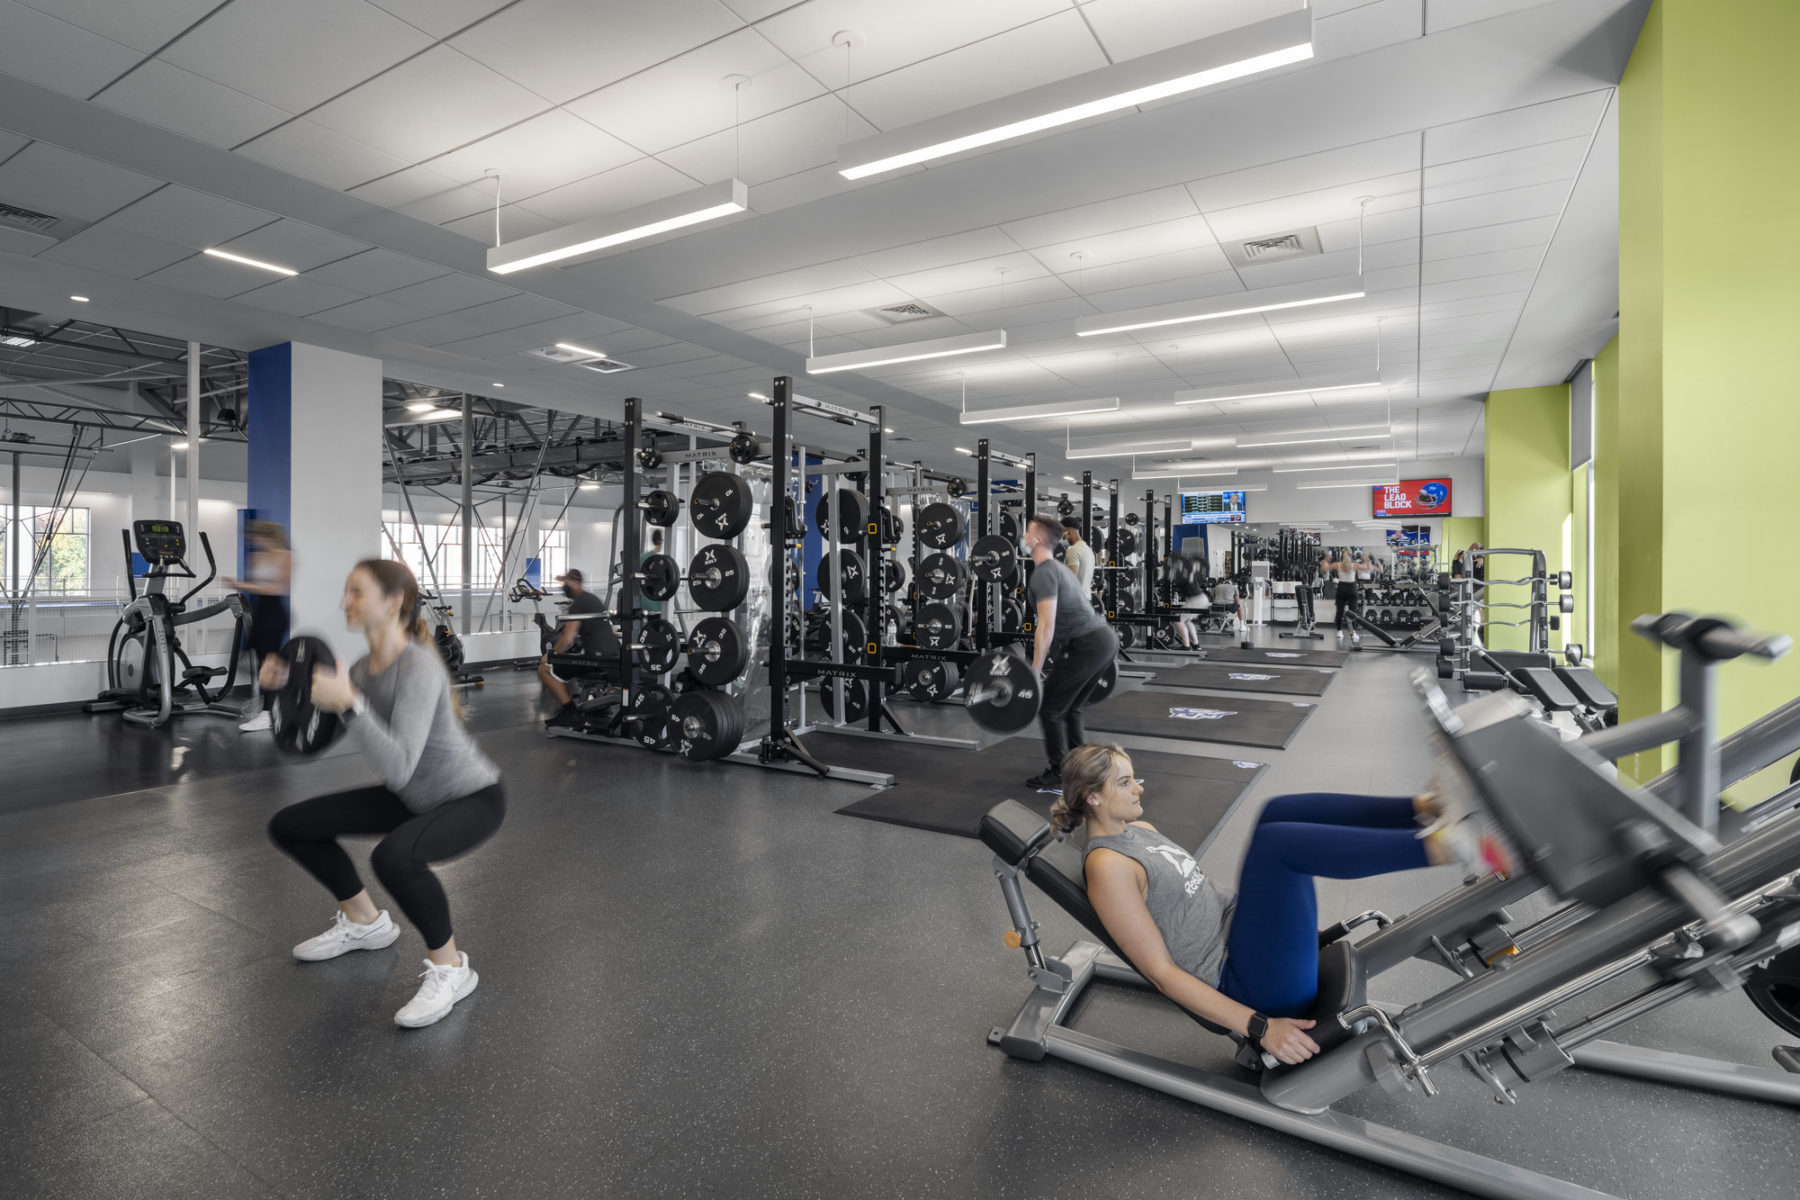 interior photo of weight training zone. a woman squats with a weight in the left foreground